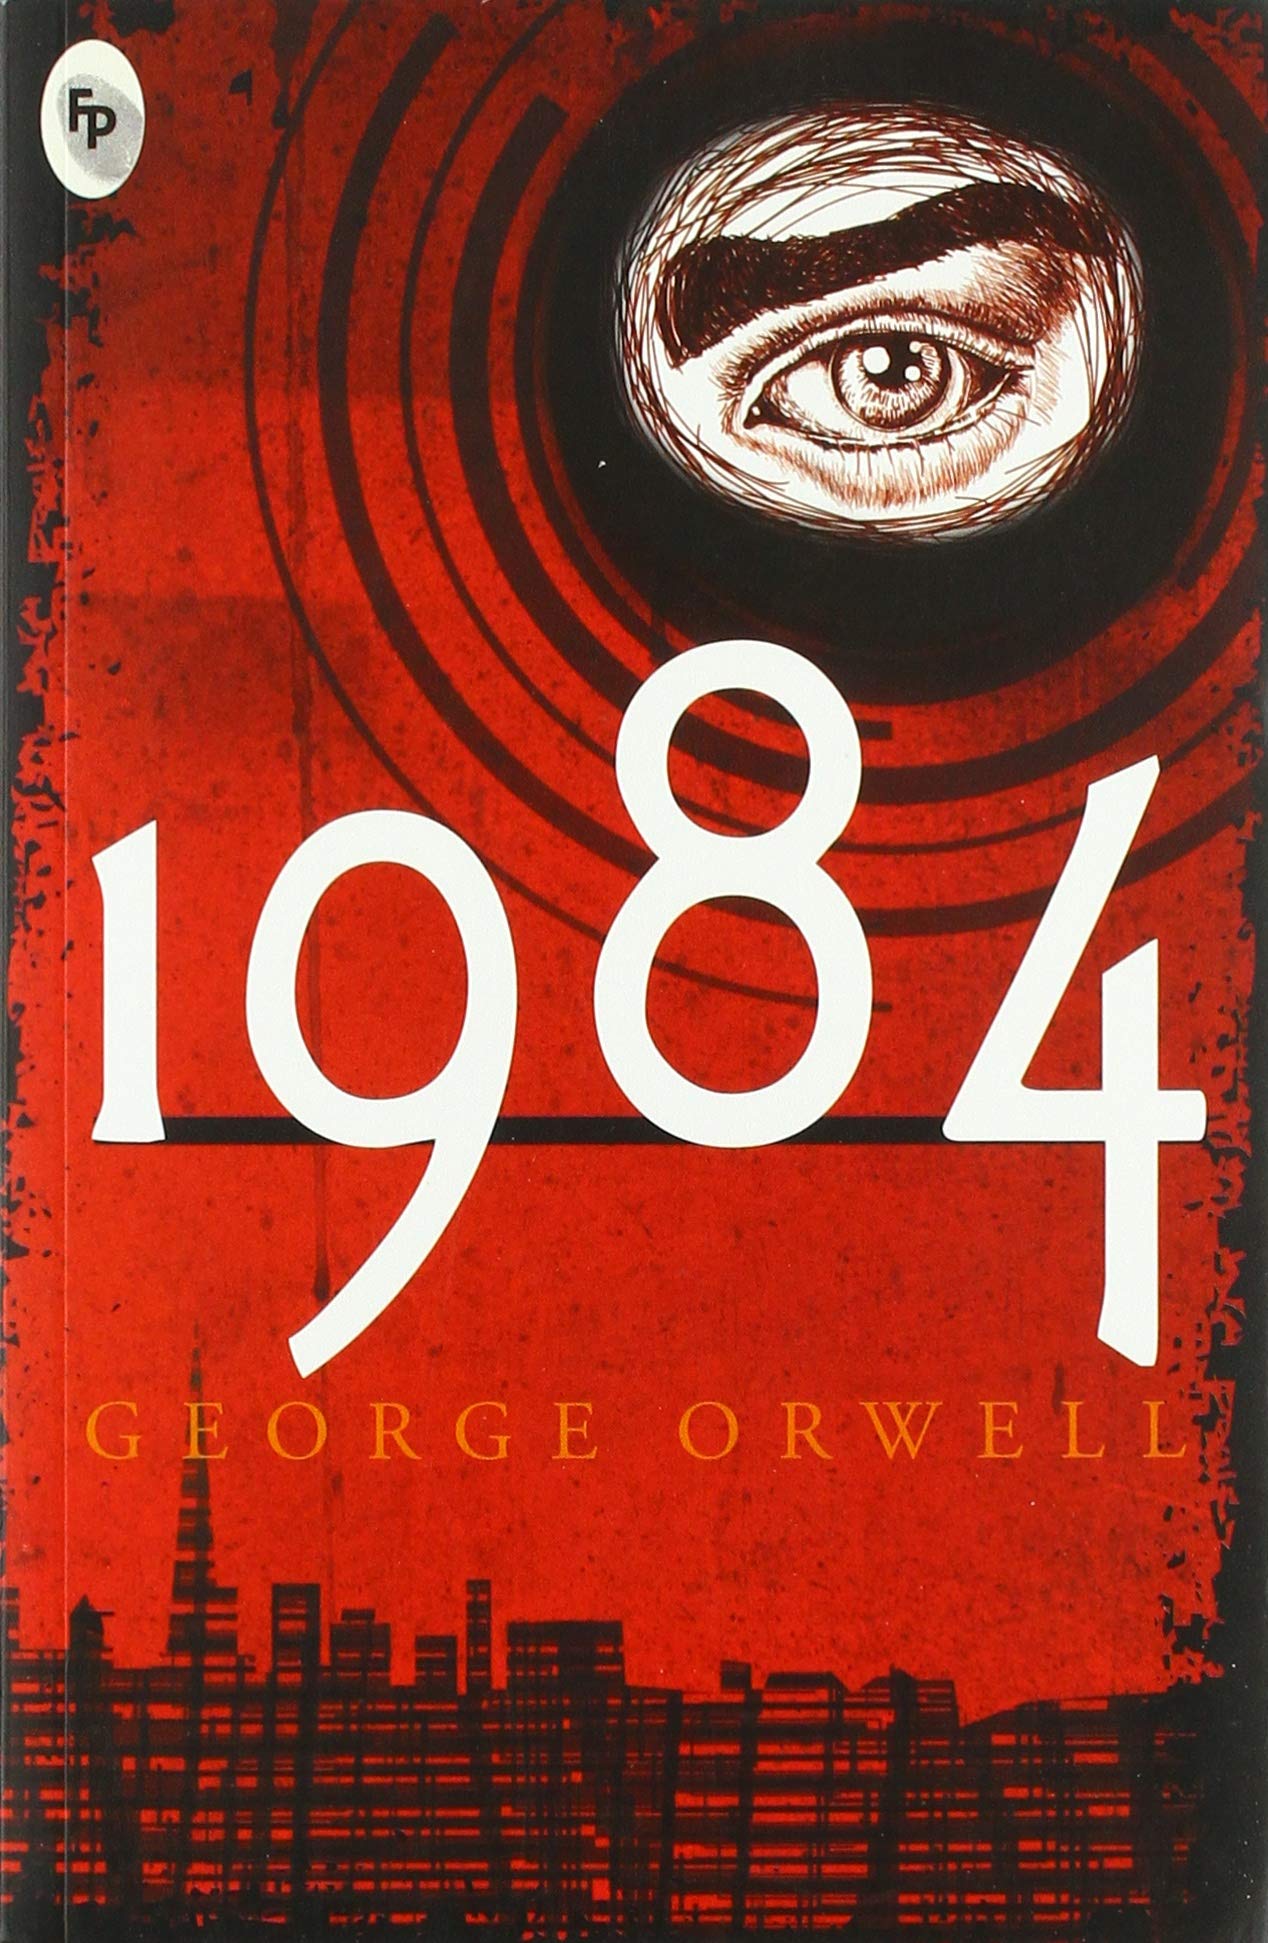 1984 book by George Orwell